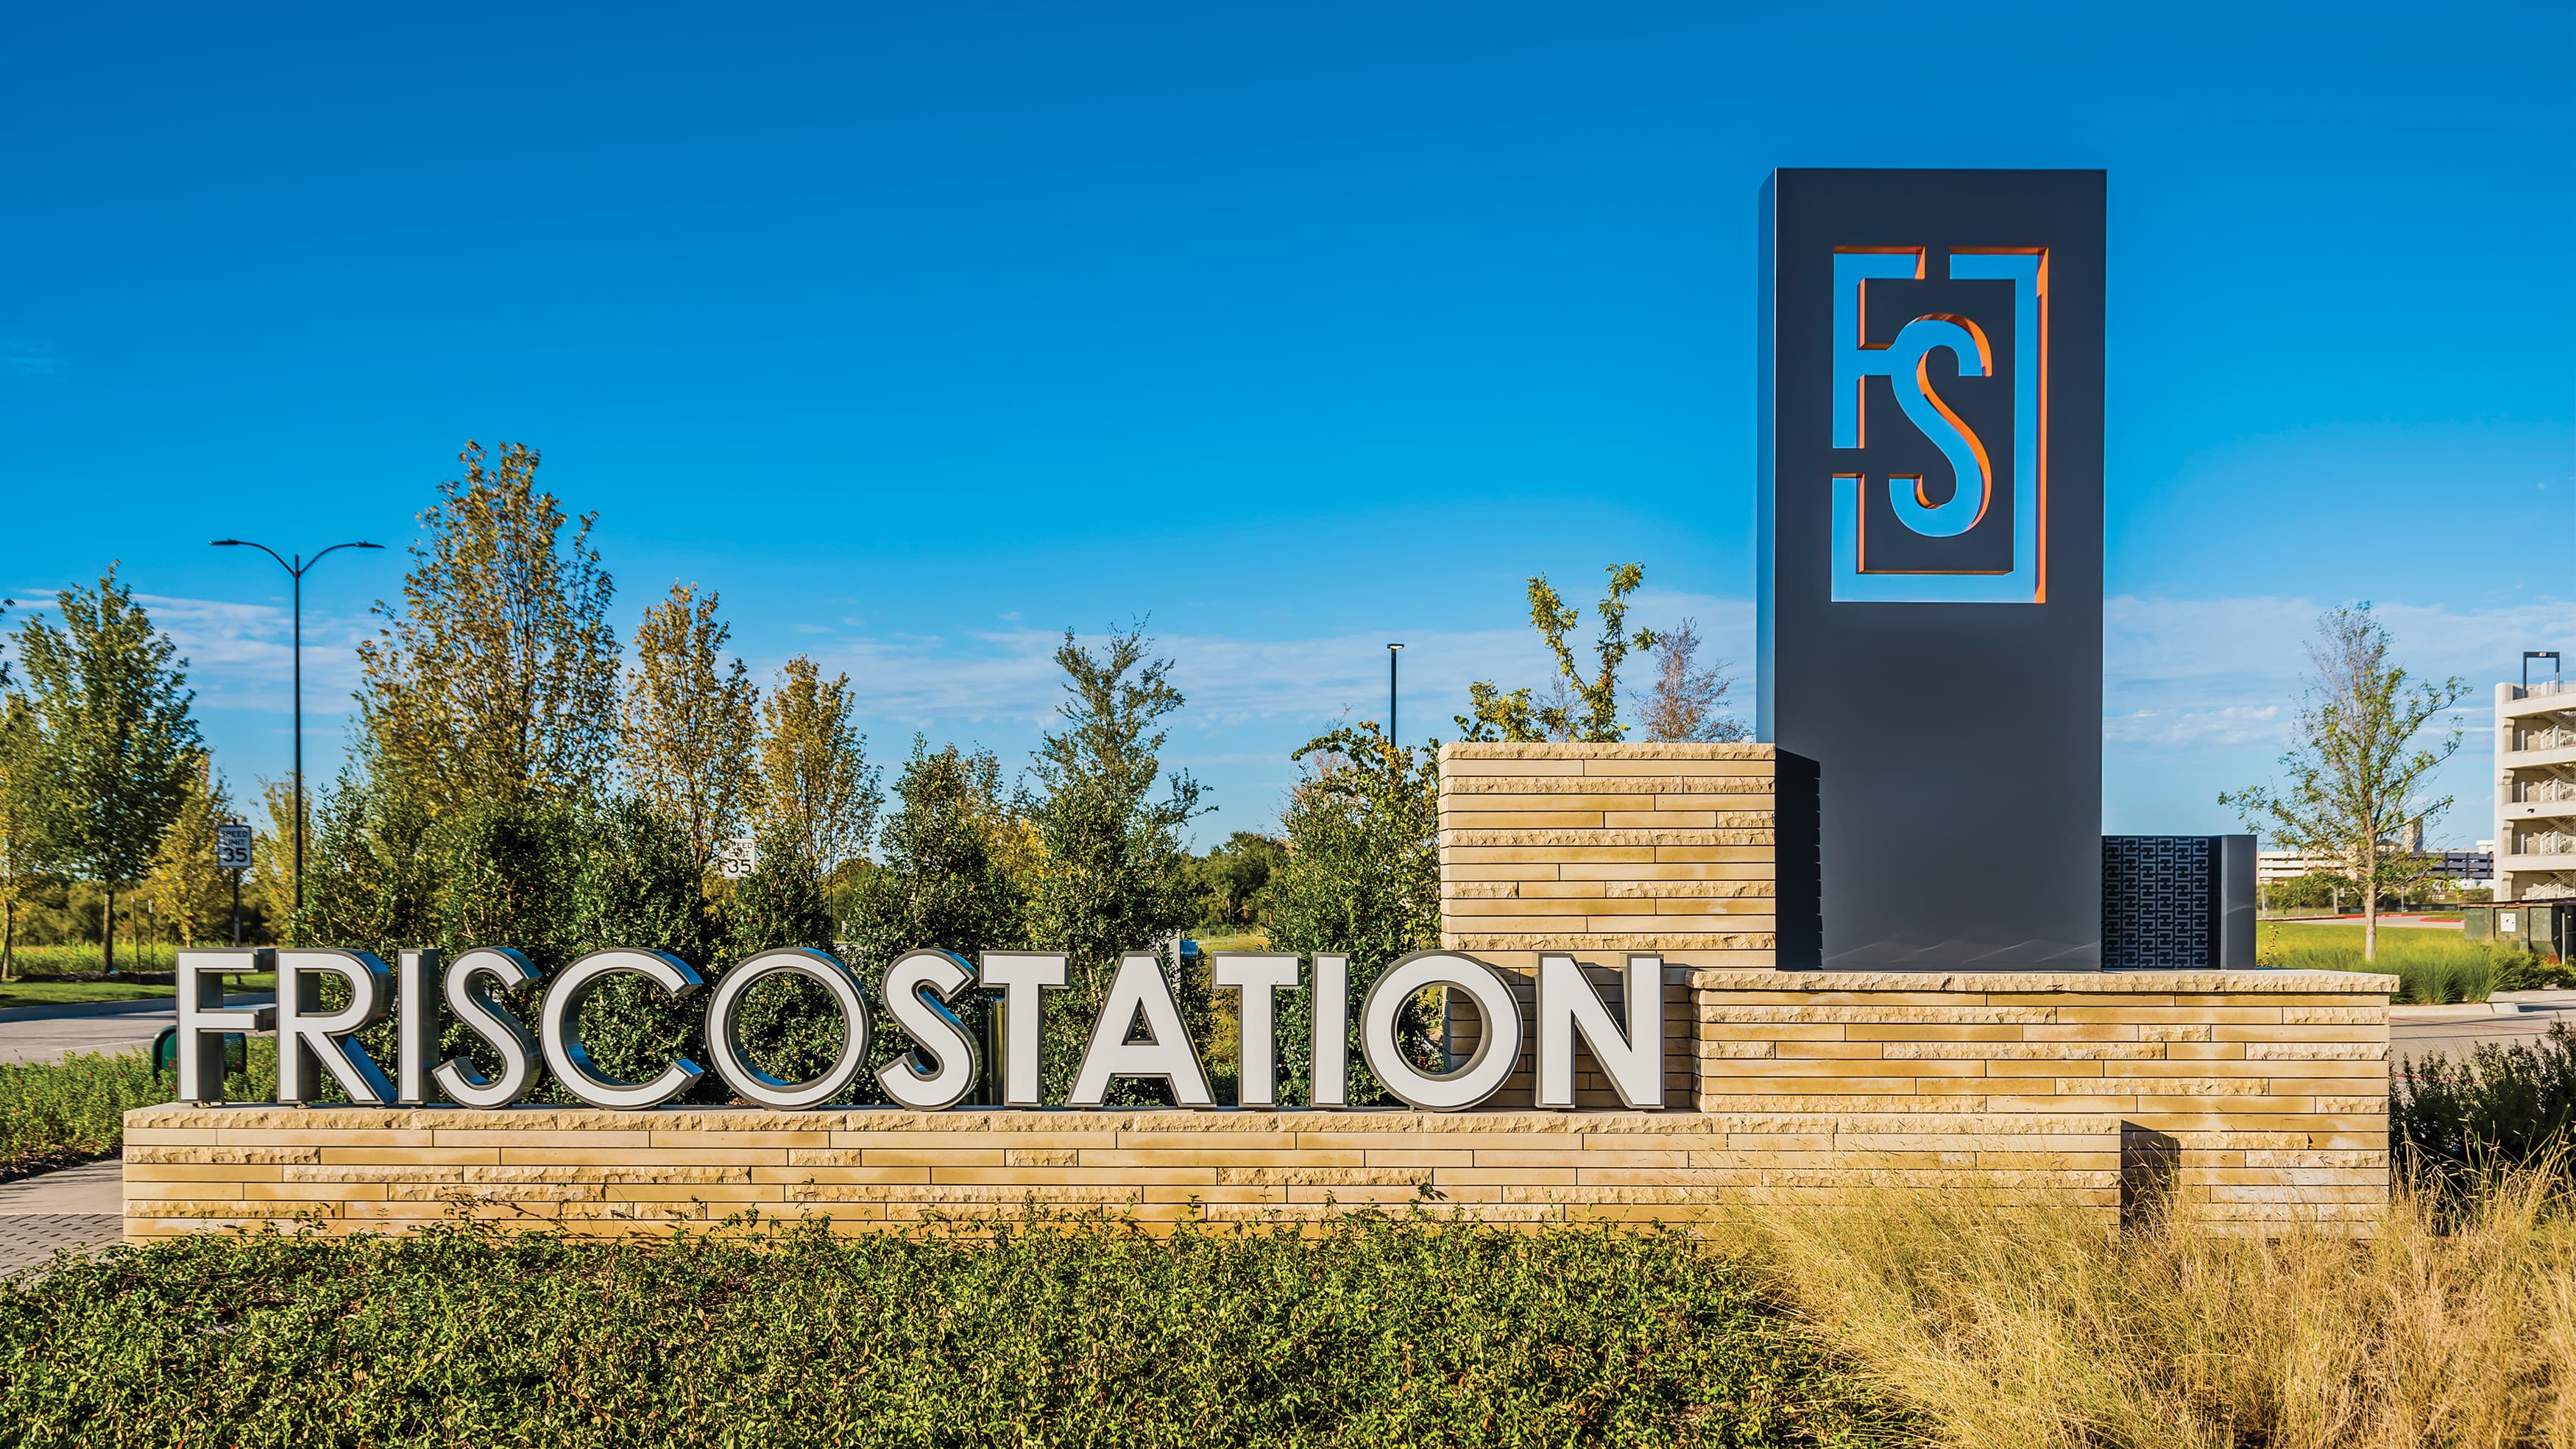 Monument Signage at the mixed-use Frisco Station project in Frisco, Texas